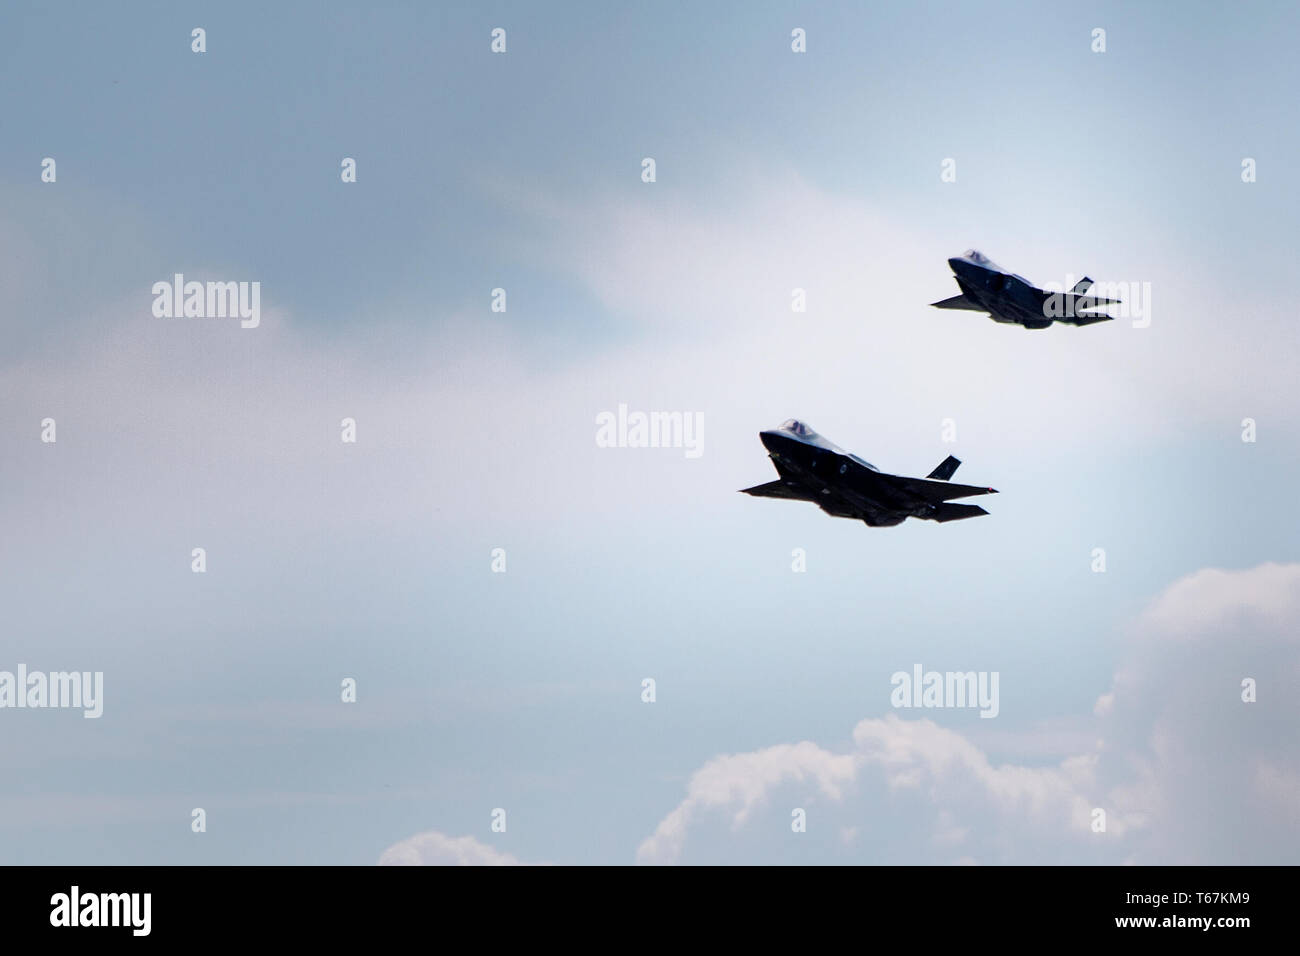 Two F-35A Fighter Jets practice take-off and landing at the Eglin Air Force Base in Florida. The F-35A is built for conventional take-off and landing. Stock Photo